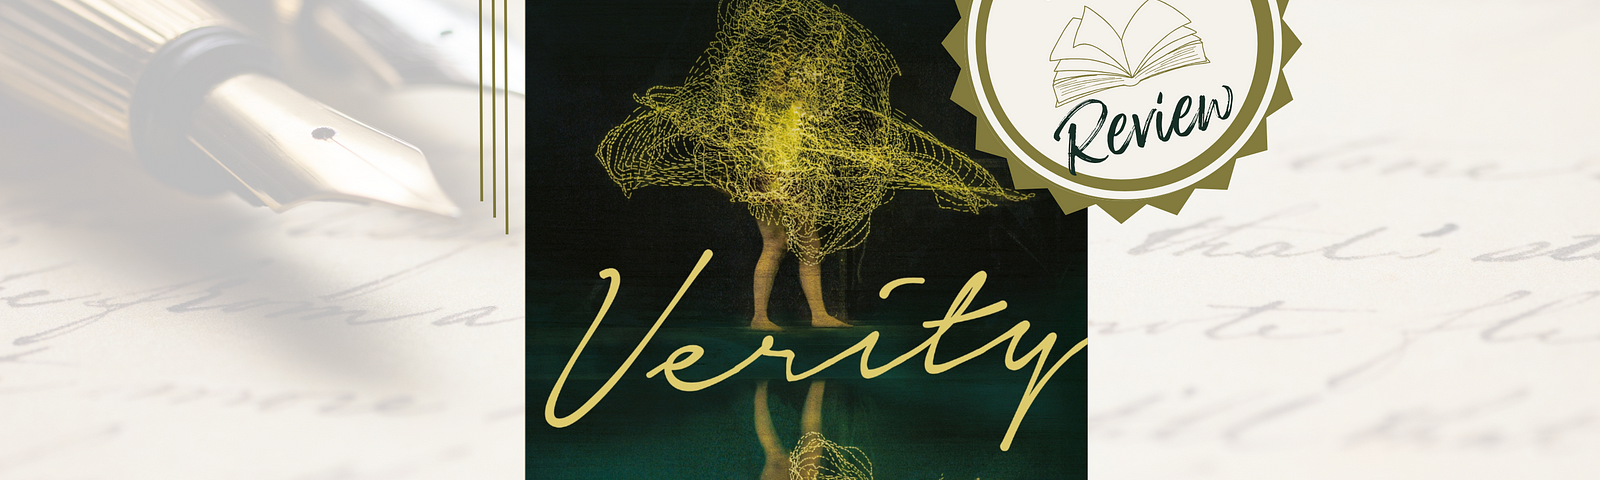 The book cover for “Verity” with a stamp that says “Good” and shows 3 stars on the bottom left corner and another stamp saying “Book Review” on the top right corner.